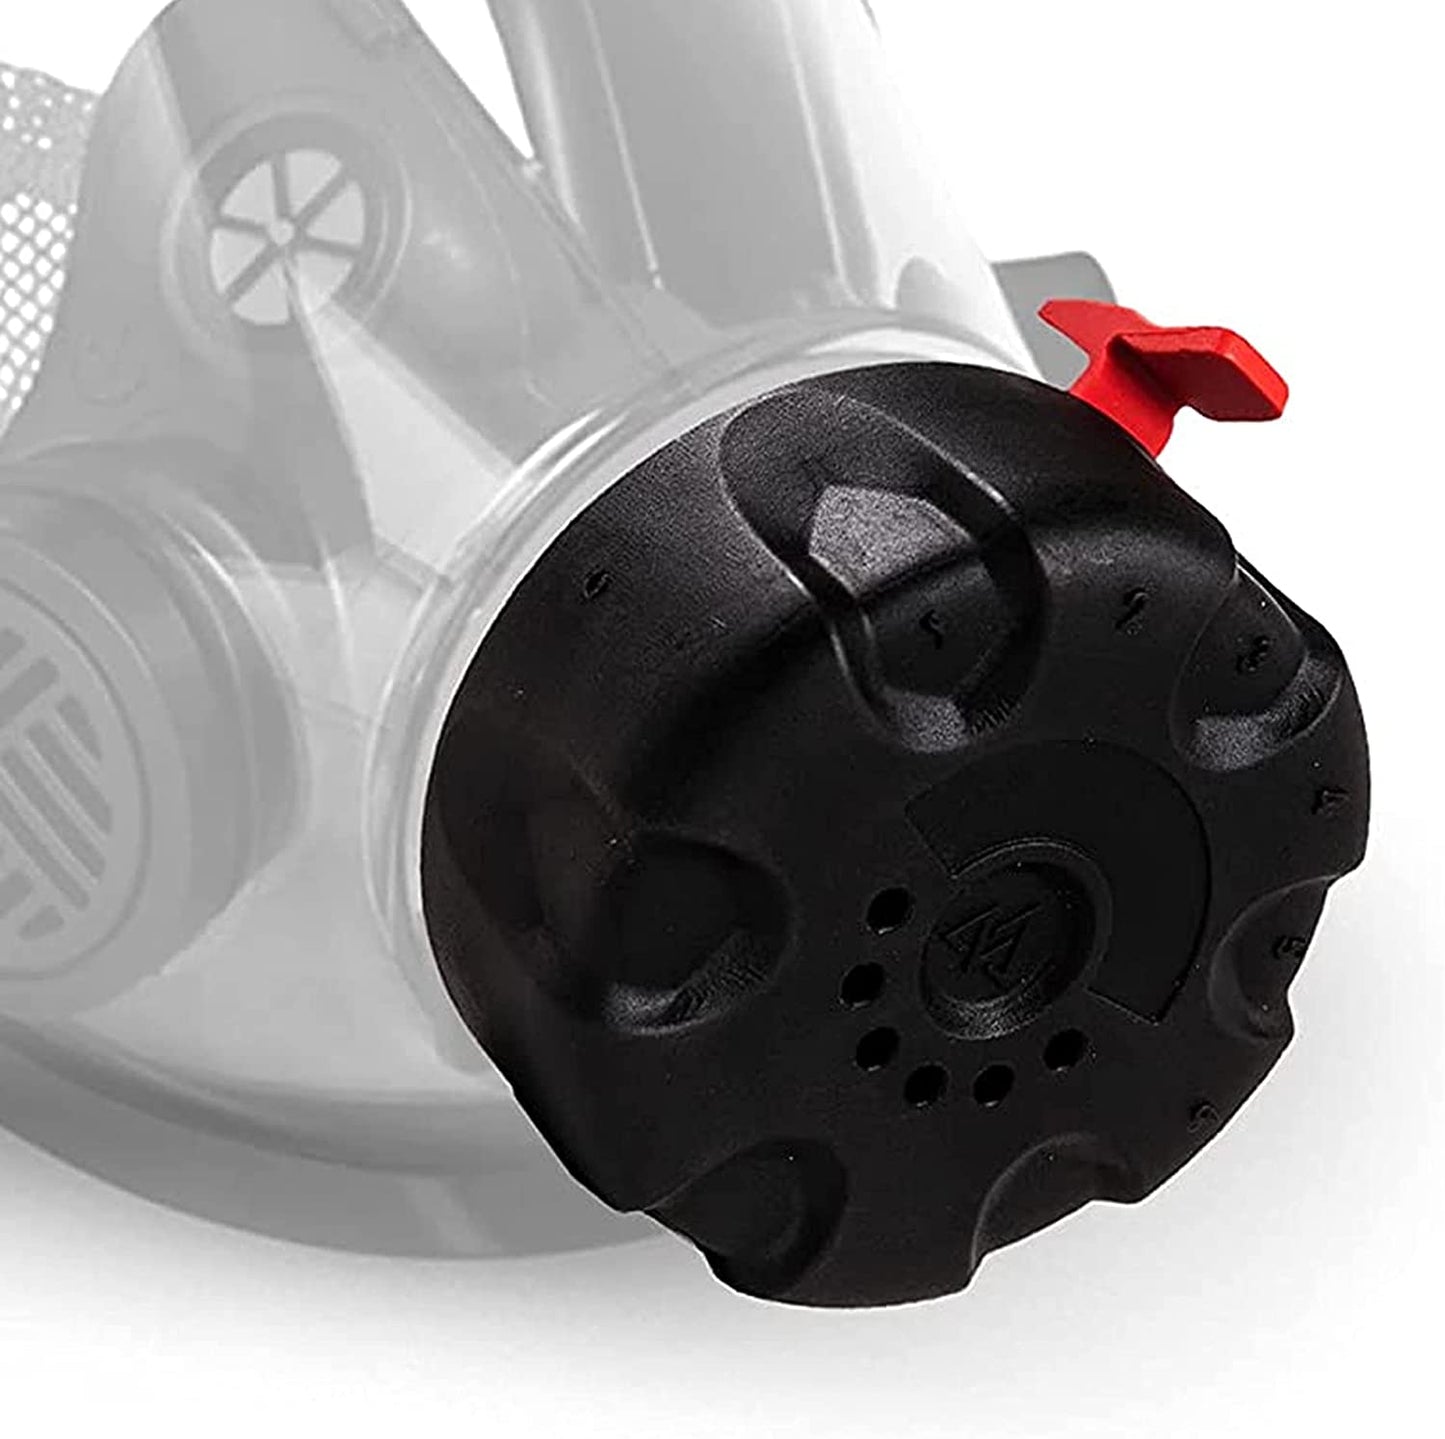 XRT Pro 2.0 SCBA Trainer Insert-Front View on mask